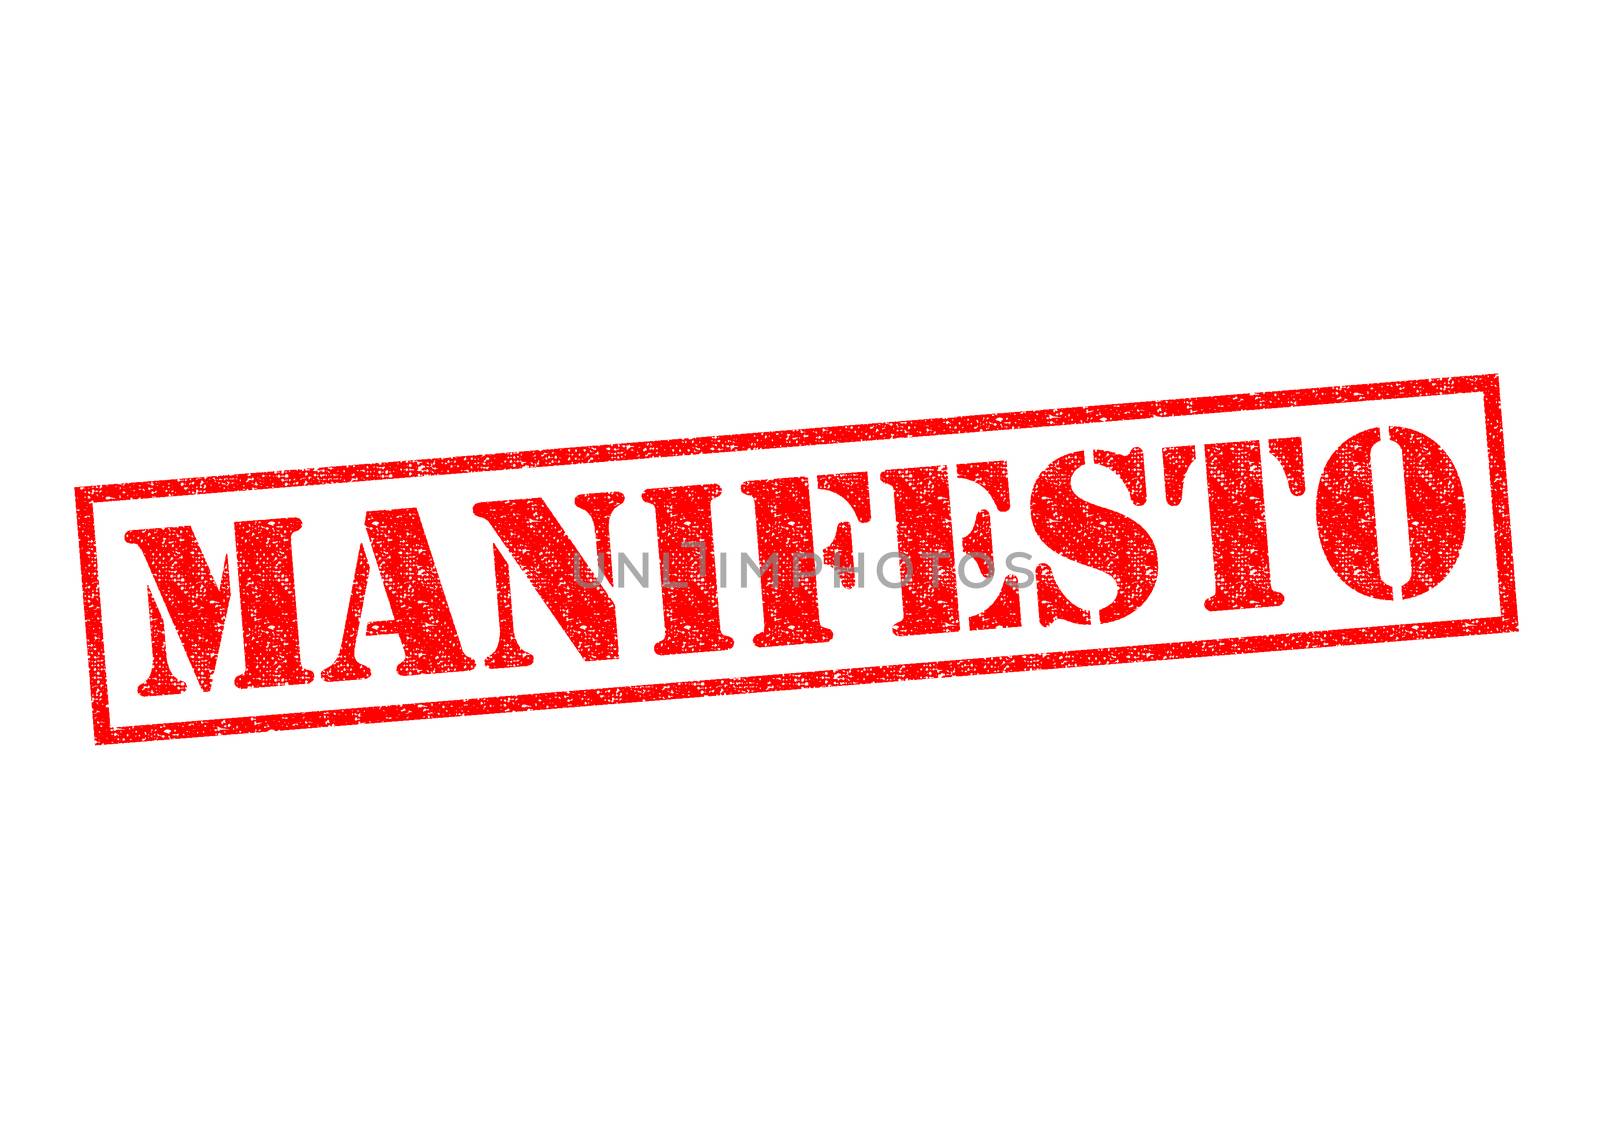 MANIFESTO red Rubber Stamp over a white background.